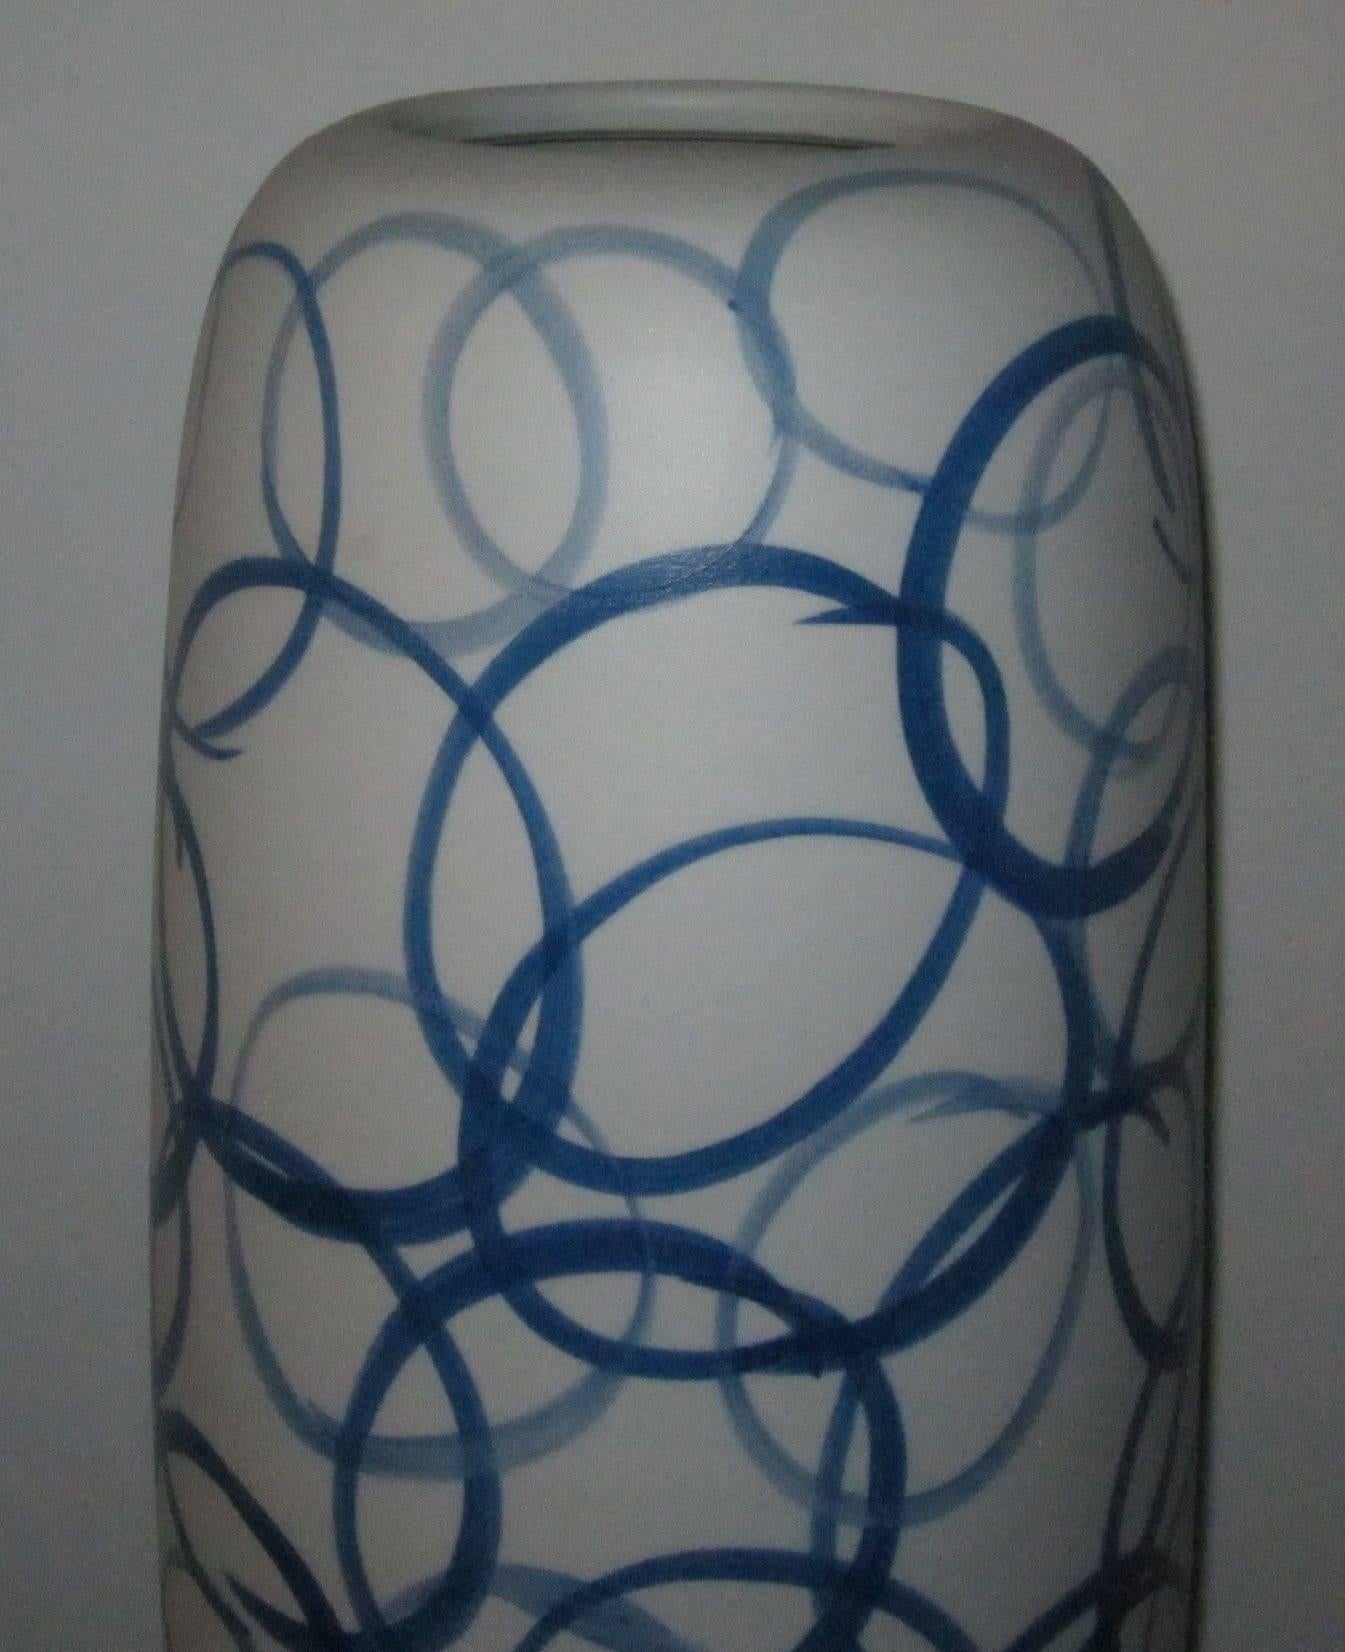 Contemporary Chinese large white porcelain vase with blue circle design.
This vase is 23.5